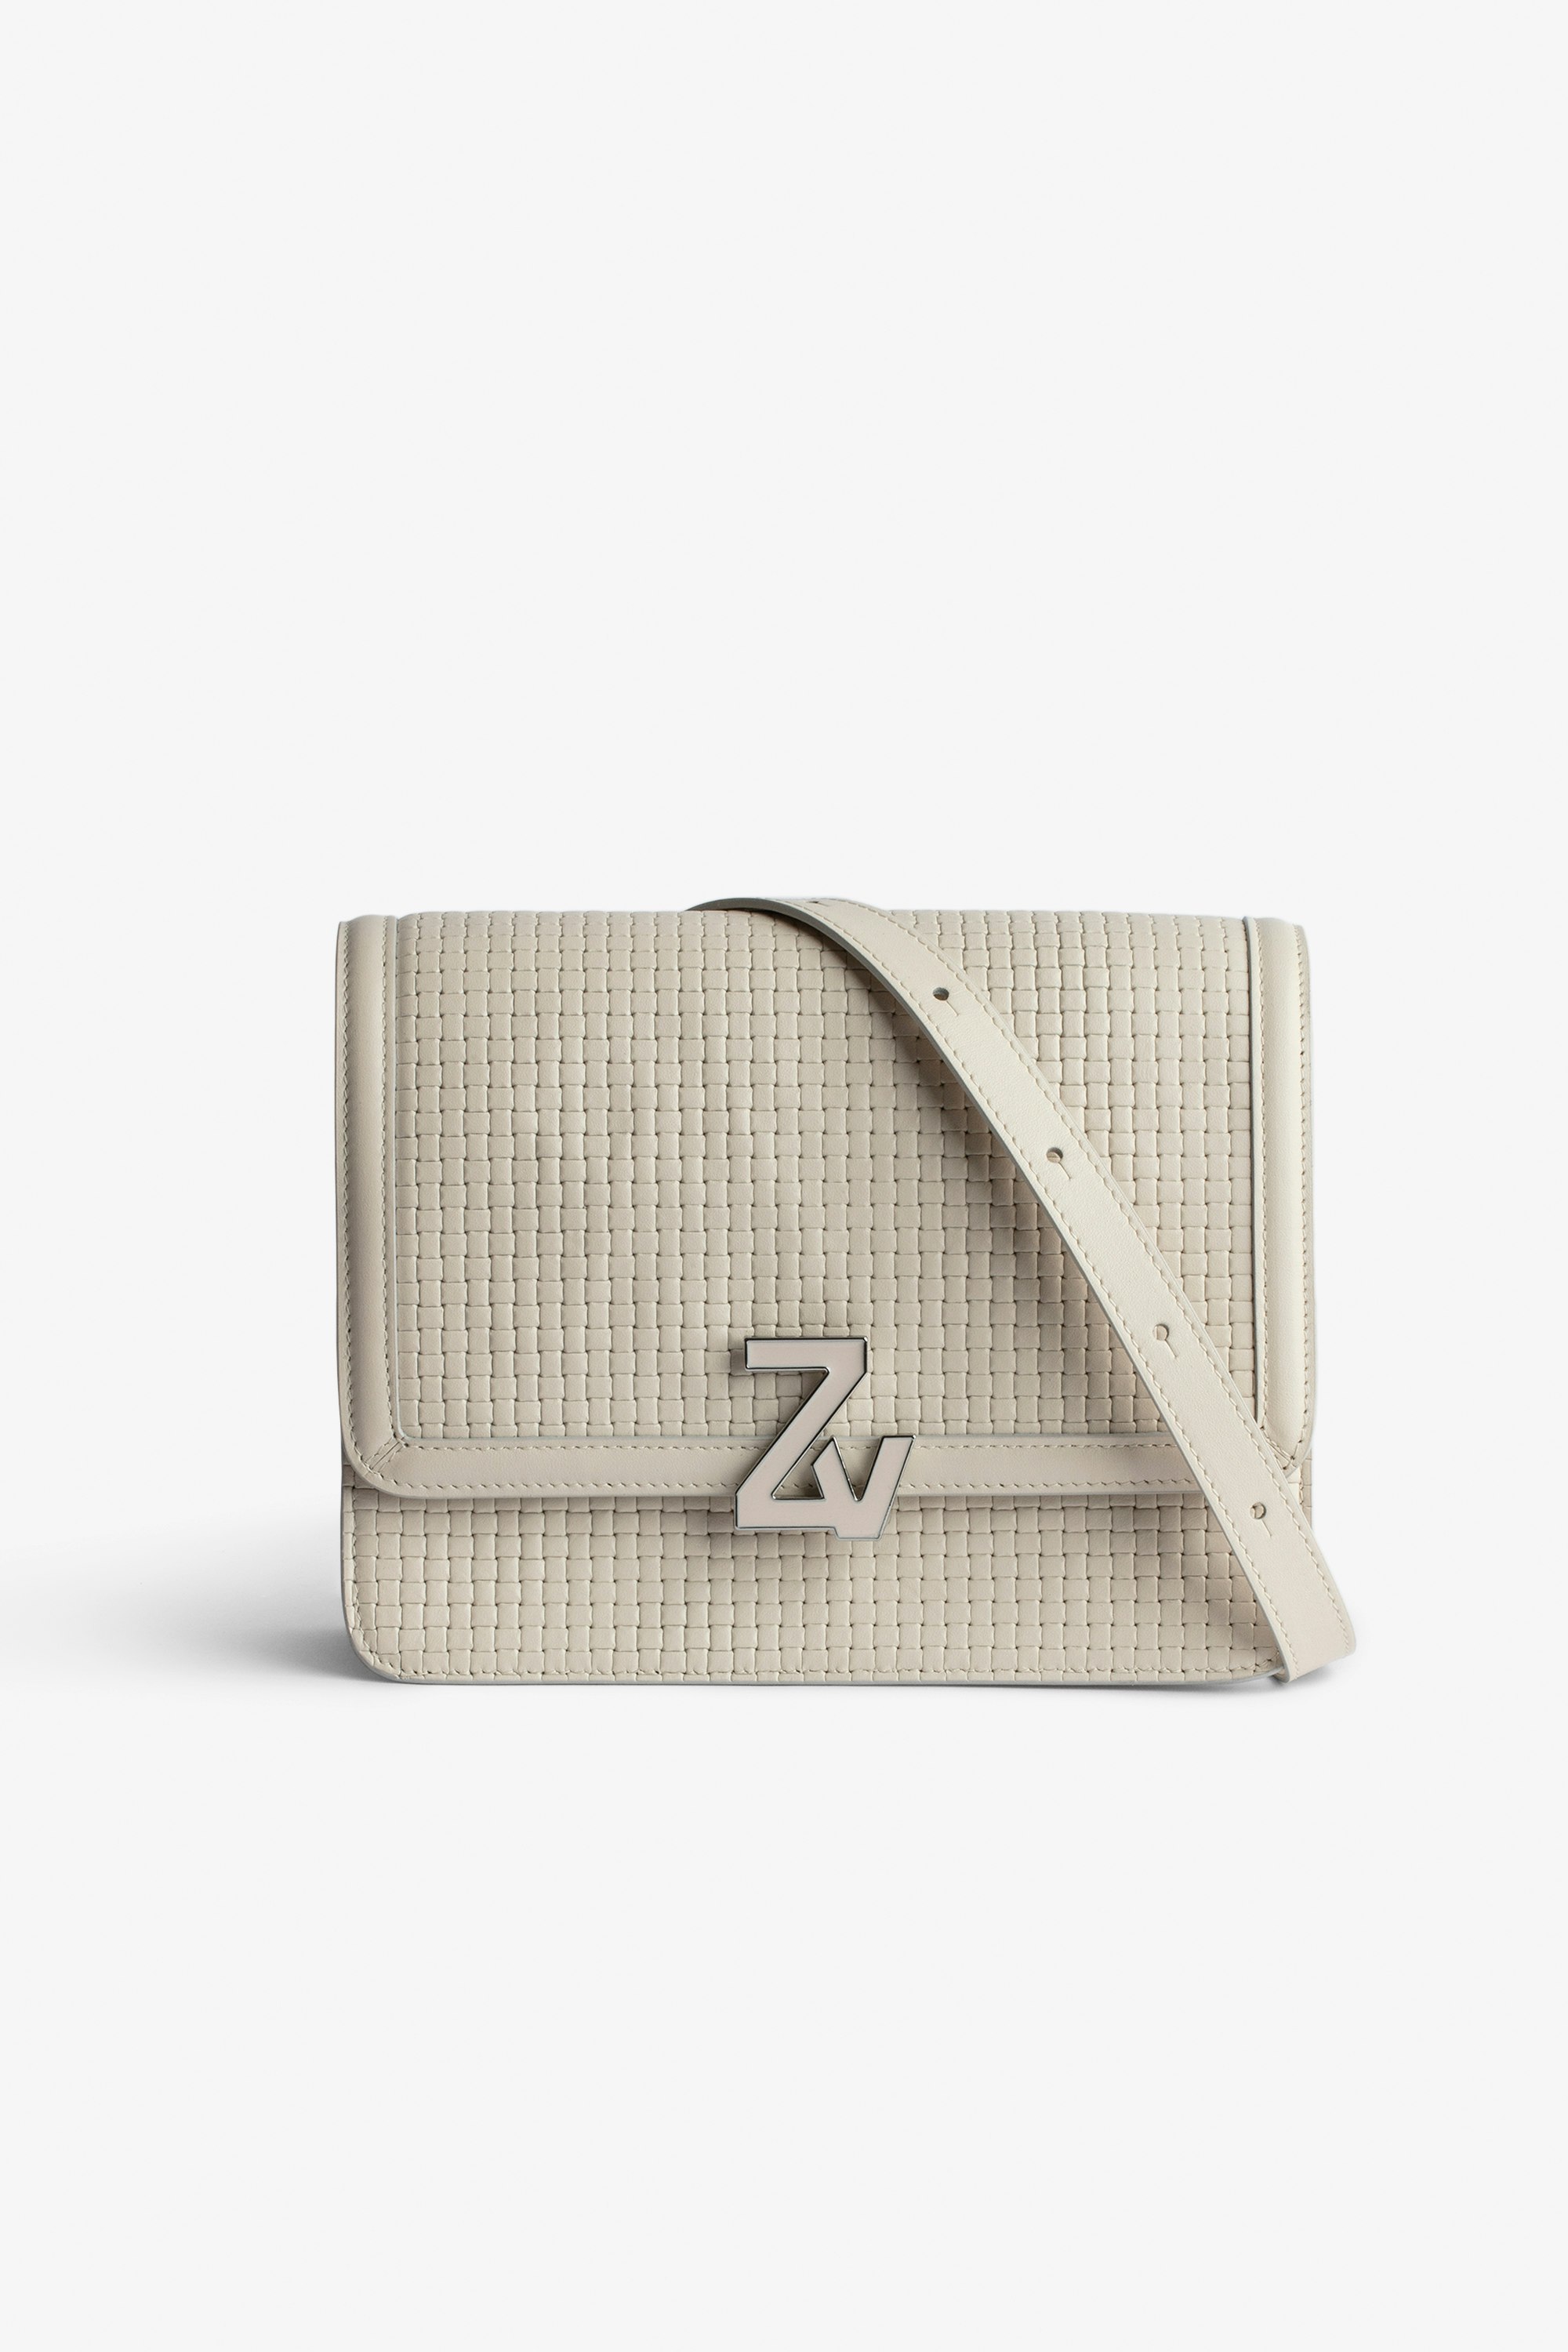 ZV Initiale Le City Bag undefined